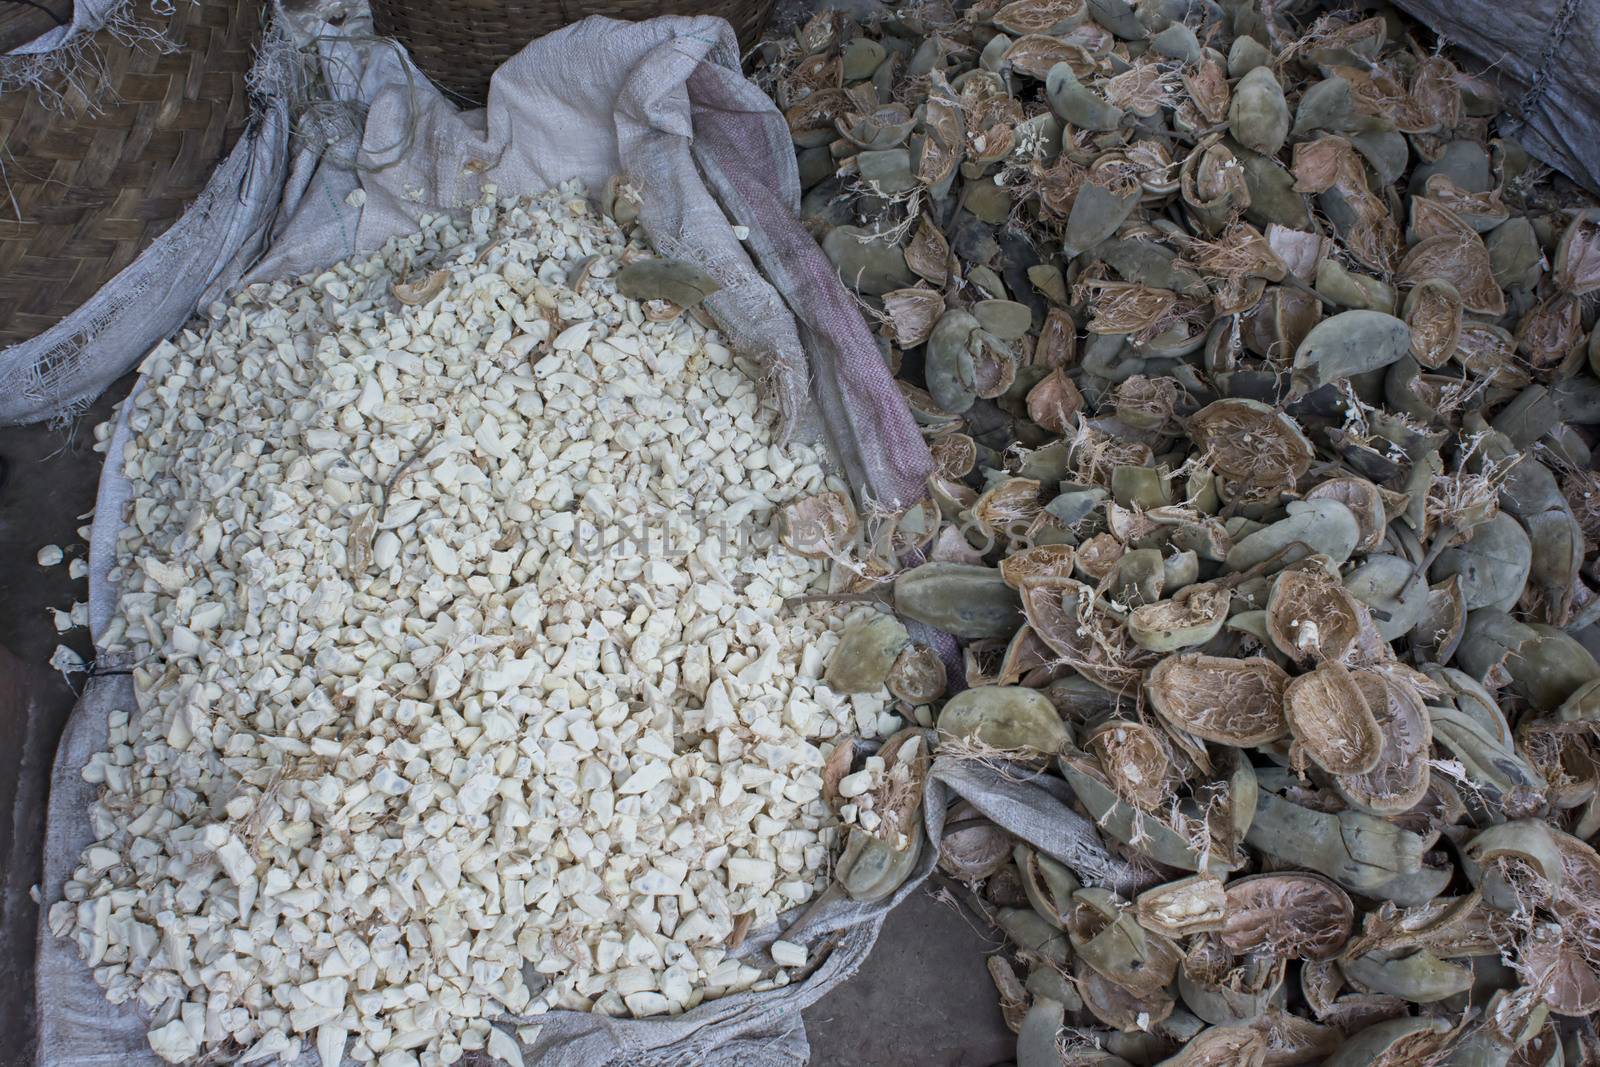 Baobab fruit for sale at the market in Zambia